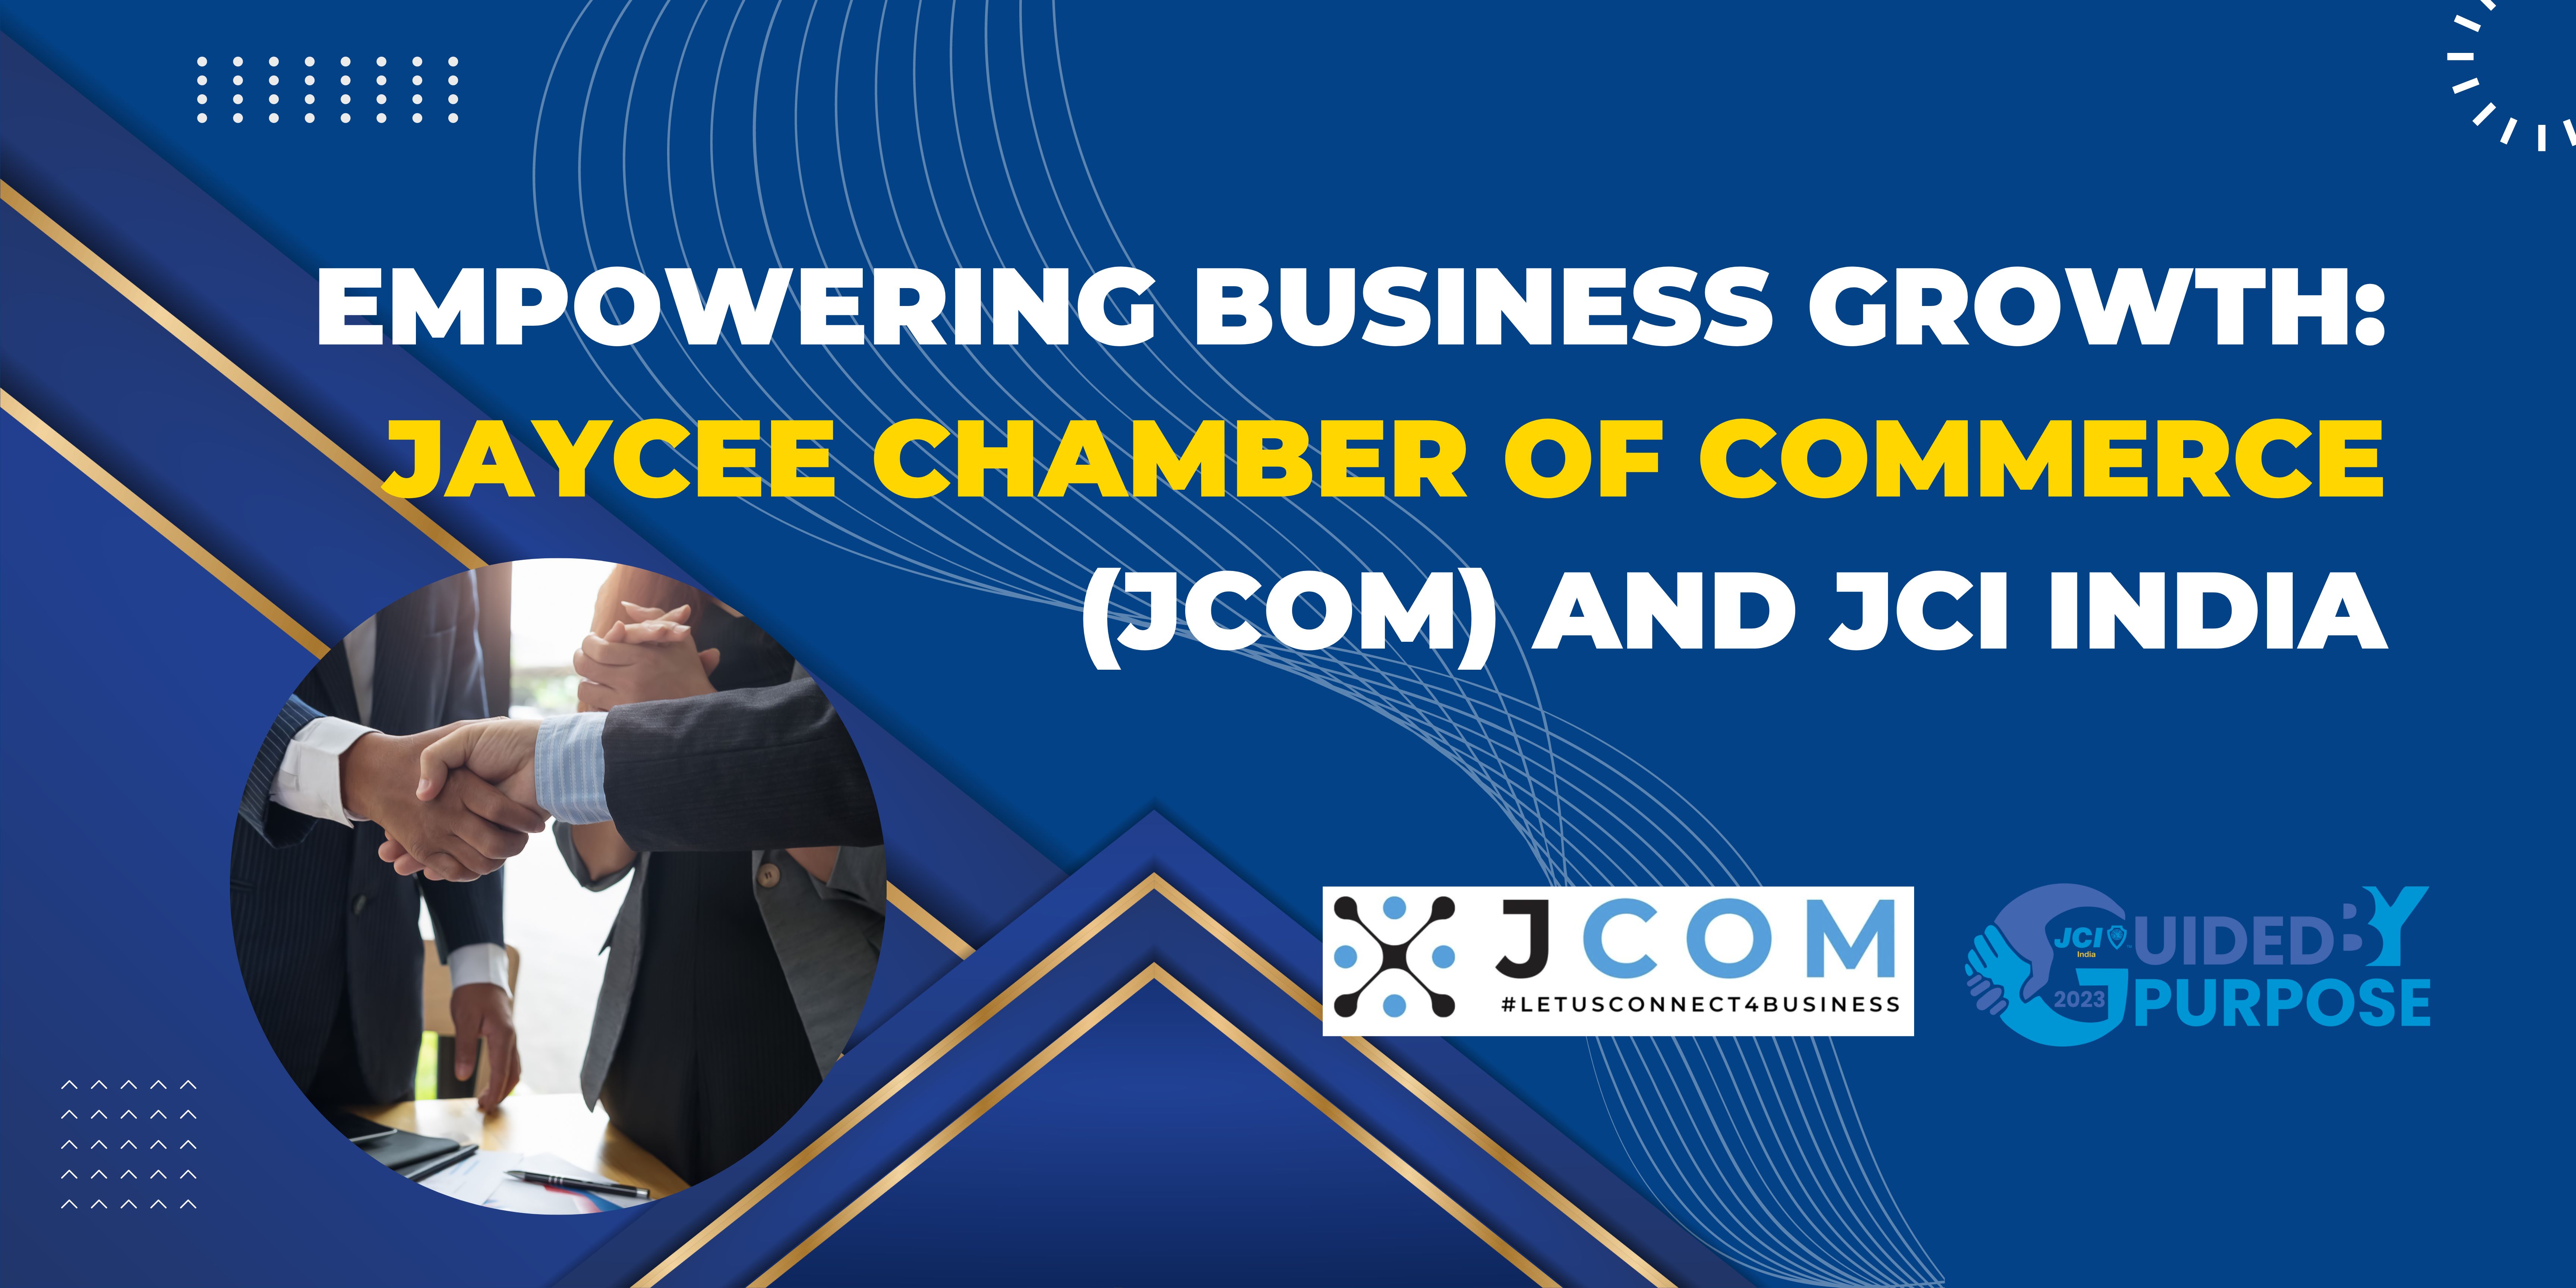 Empowering Business Growth: Jaycee Chamber of Commerce (JCOM) and JCI India